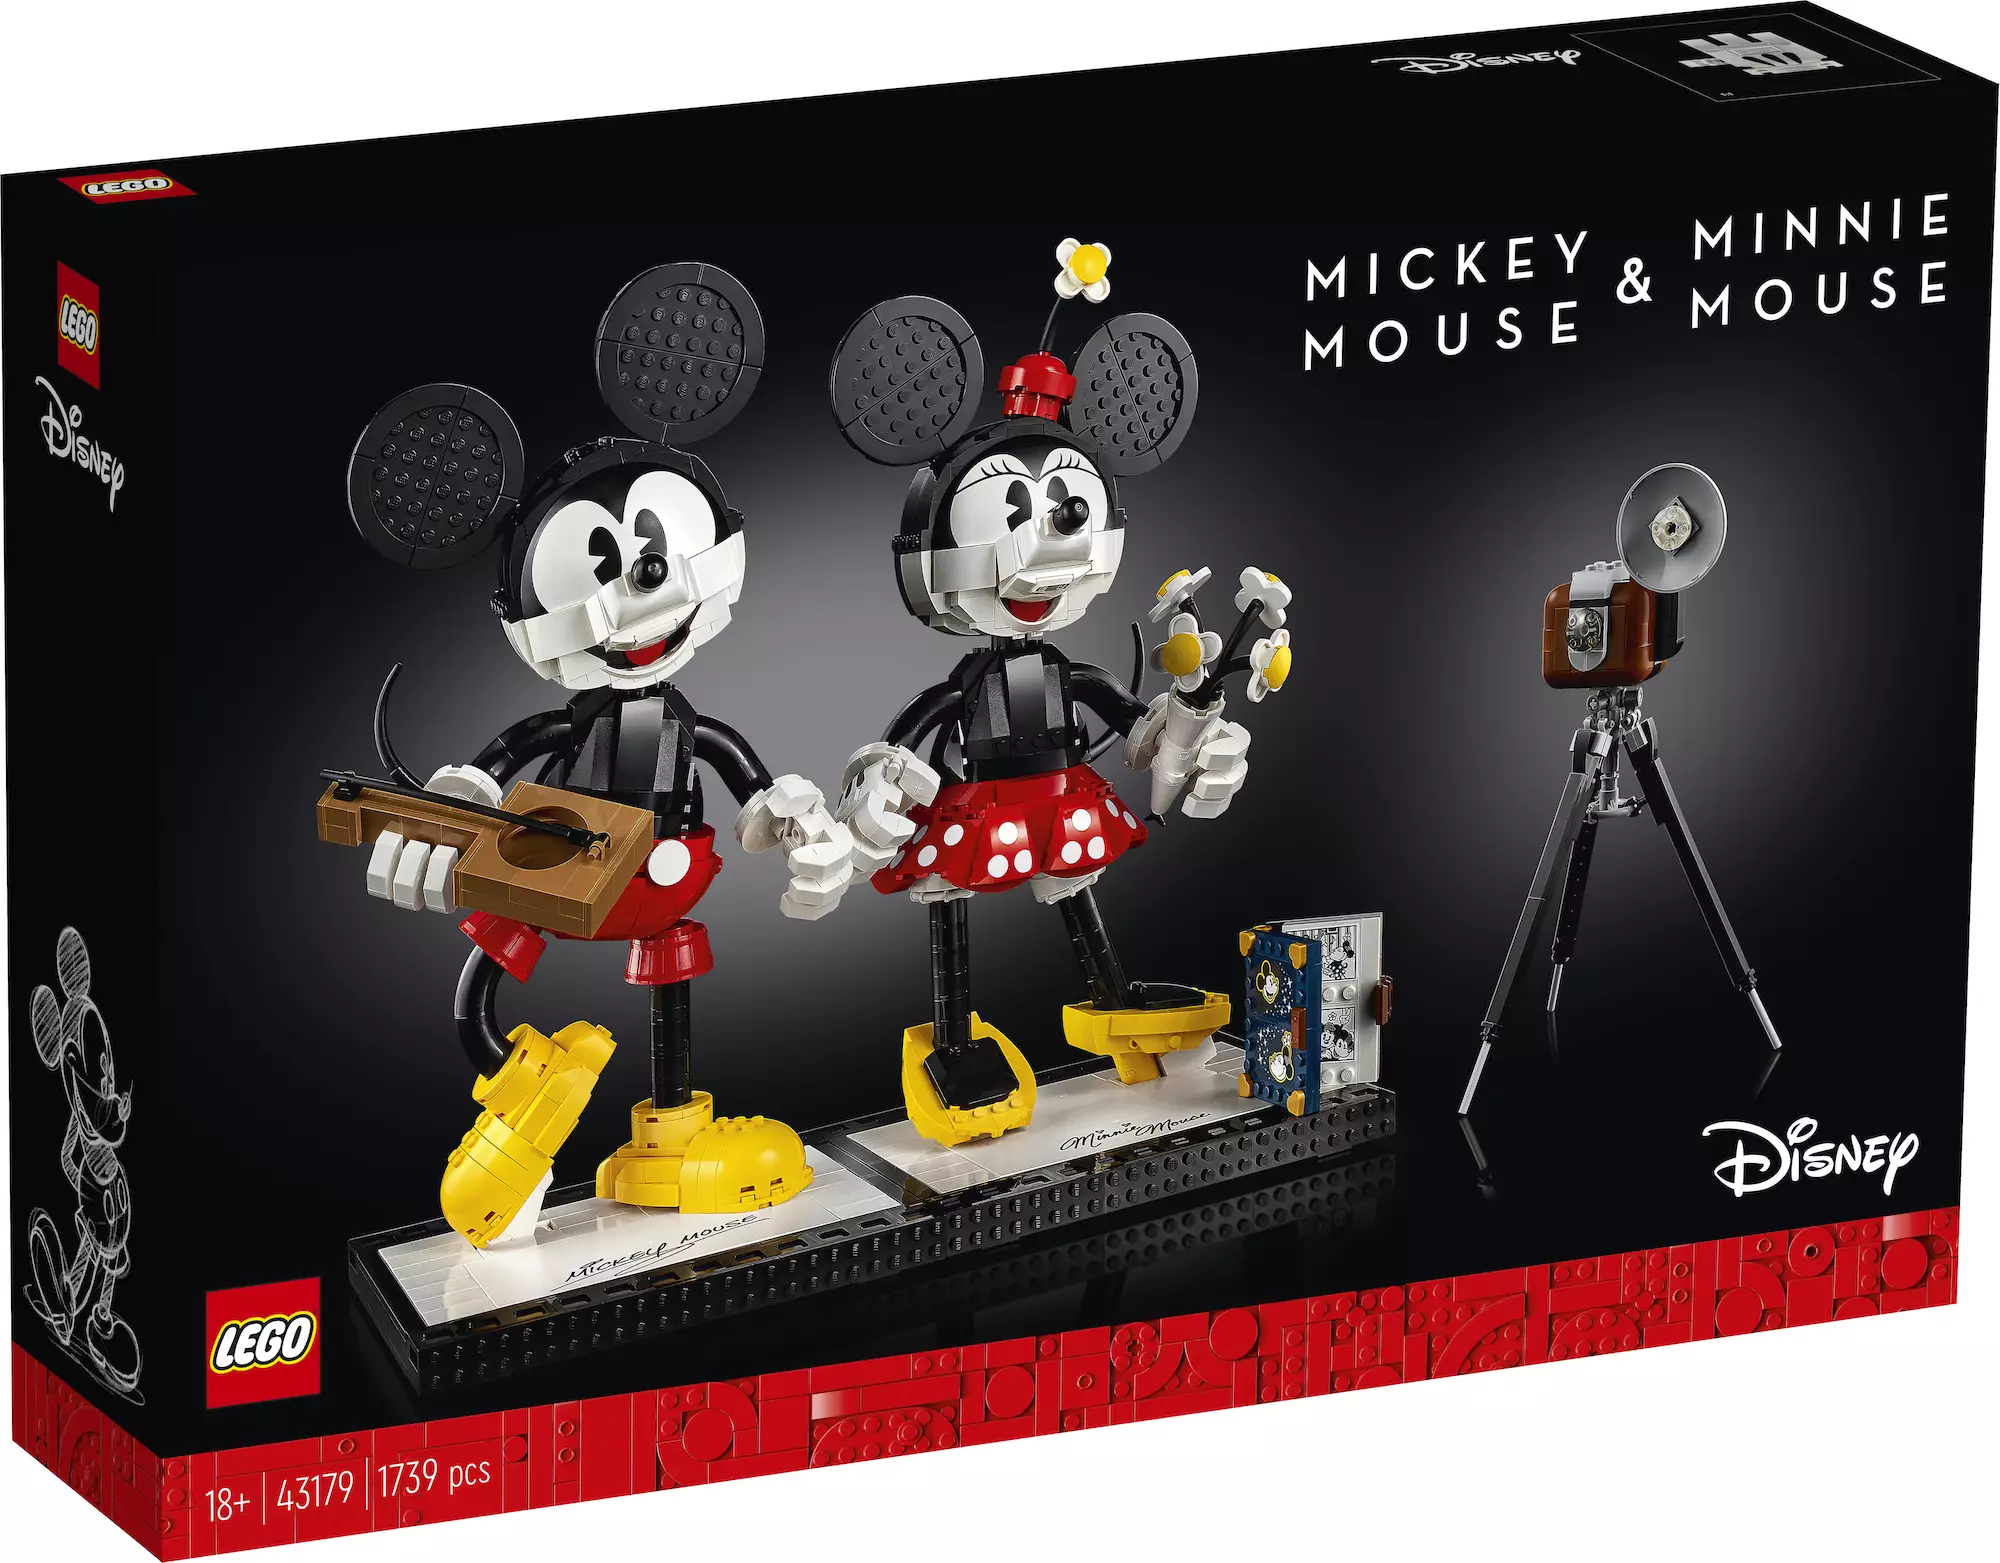 The new Minnie and Mickey LEGO set retails at £169.99 (